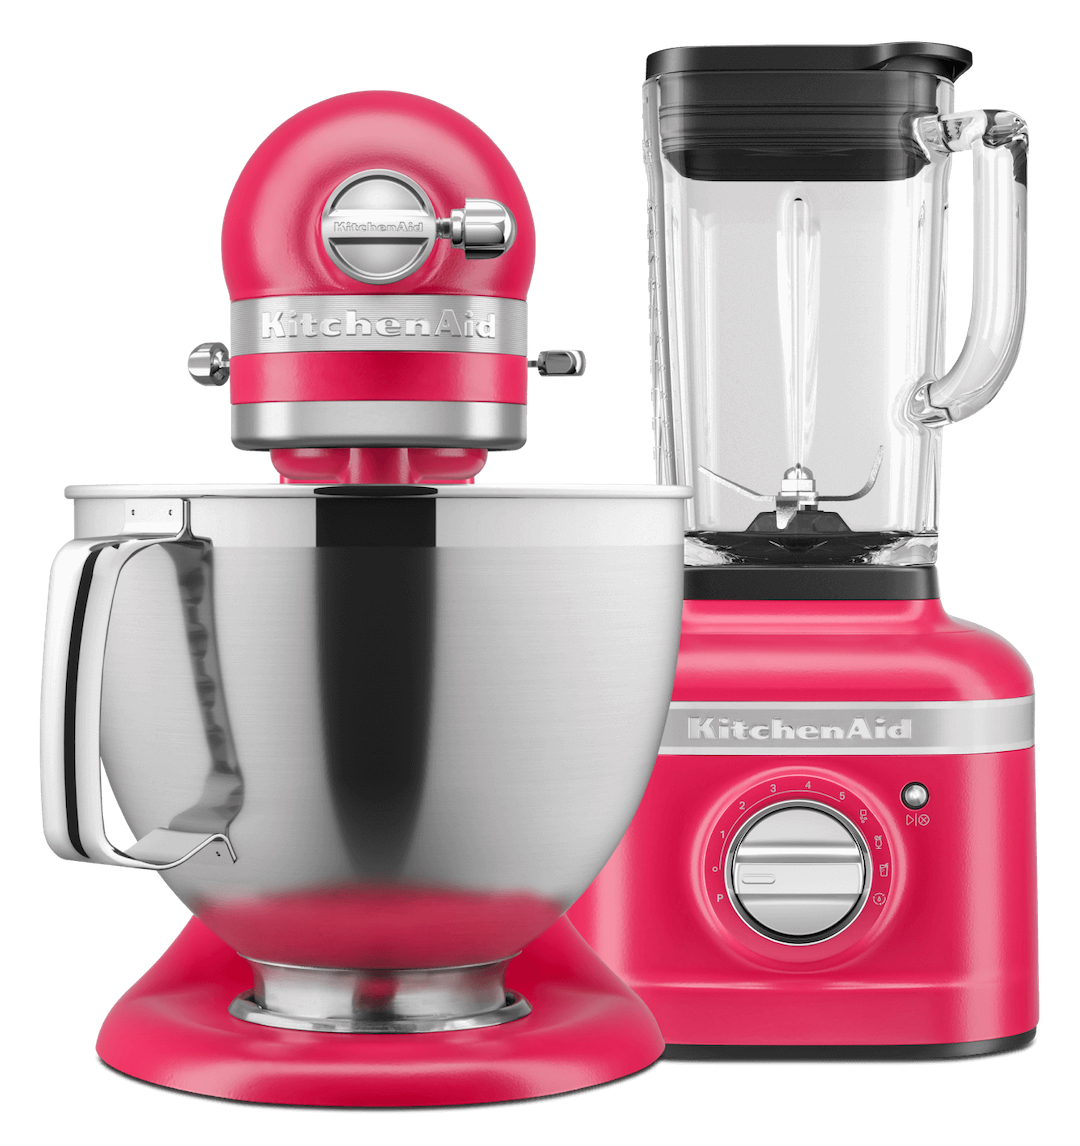 KitchenAid Color Of The Year Hibiscus 2 1676006561 